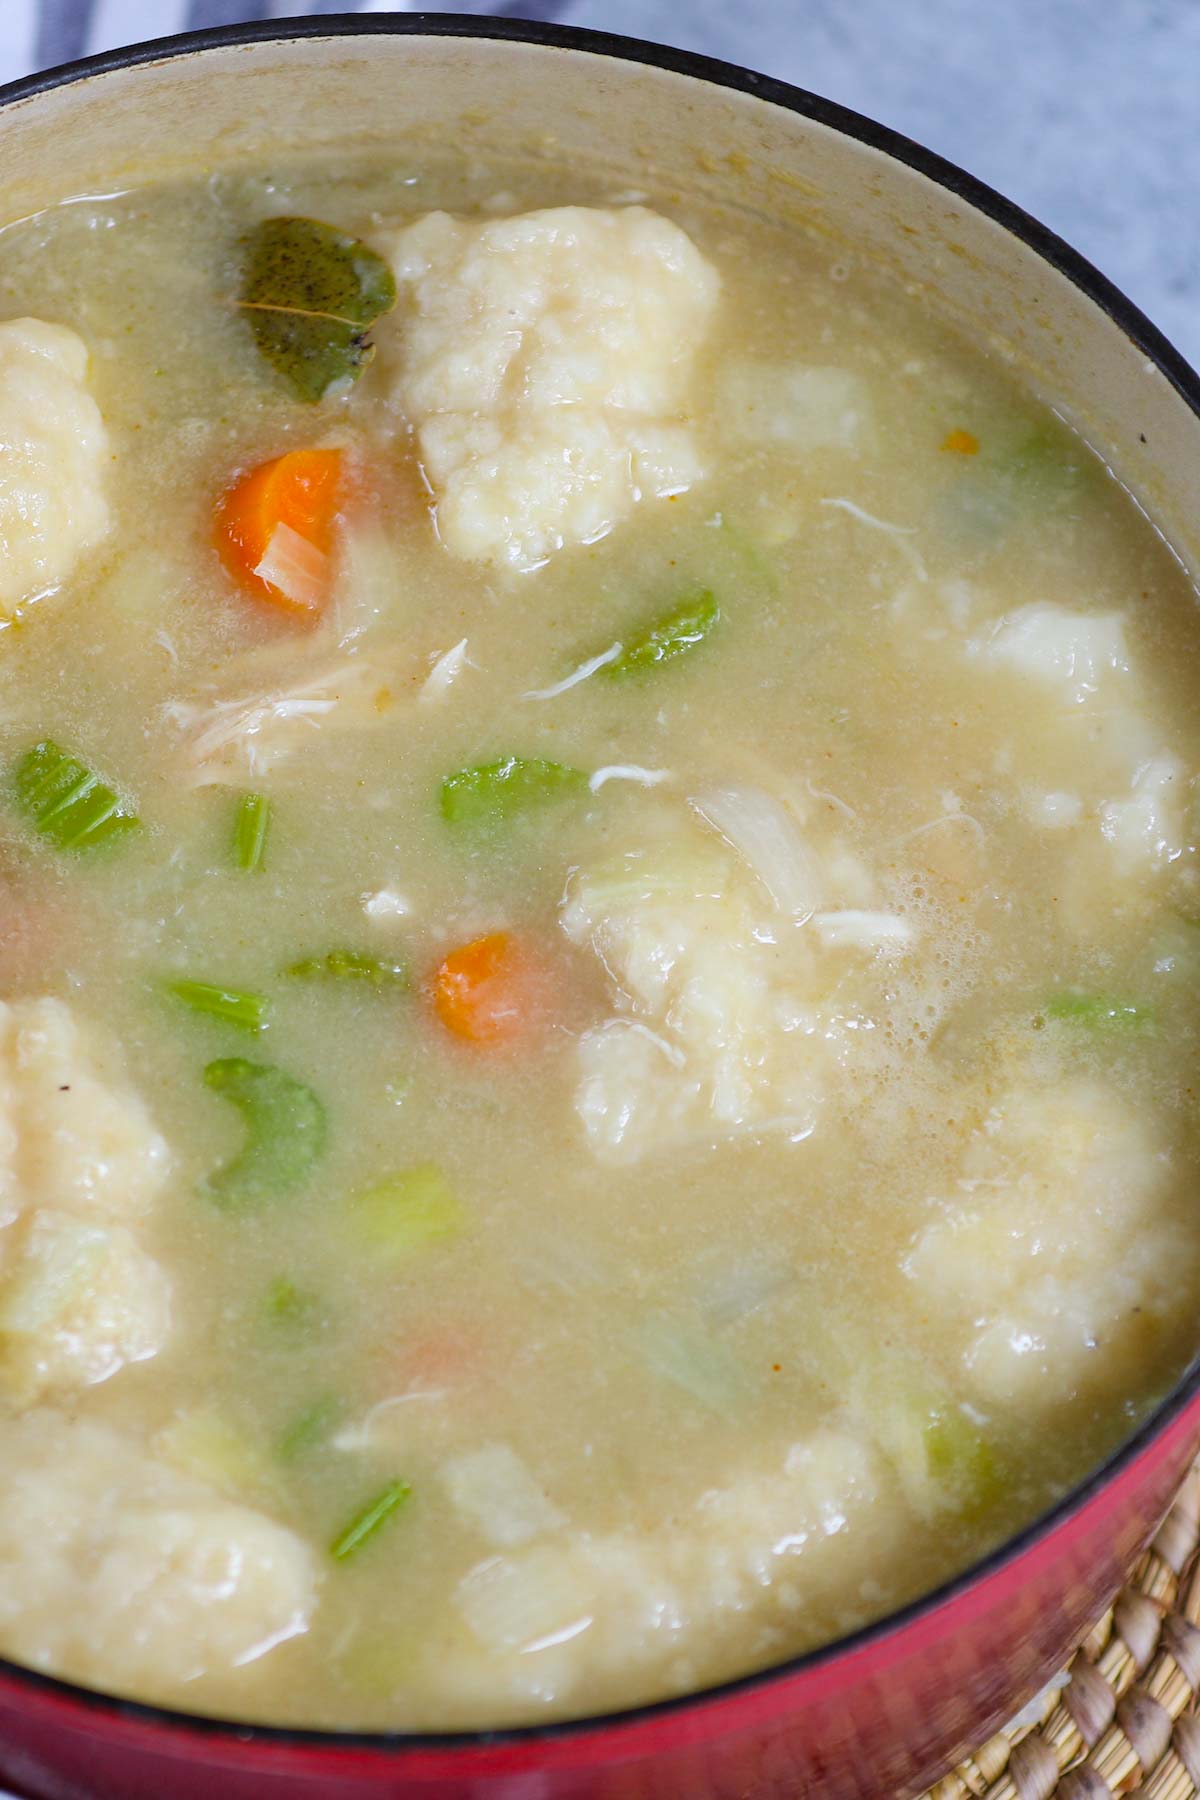 There’s nothing quite as comforting as a warm, savory bowl of homemade Bisquick Chicken and Dumplings. Made with Original Bisquick mix, these hearty Bisquick Dumplings are super easy to make in a Dutch oven or slow cooker. You can boil the chicken from scratch or use rotisserie chicken for a quick dinner recipe. 